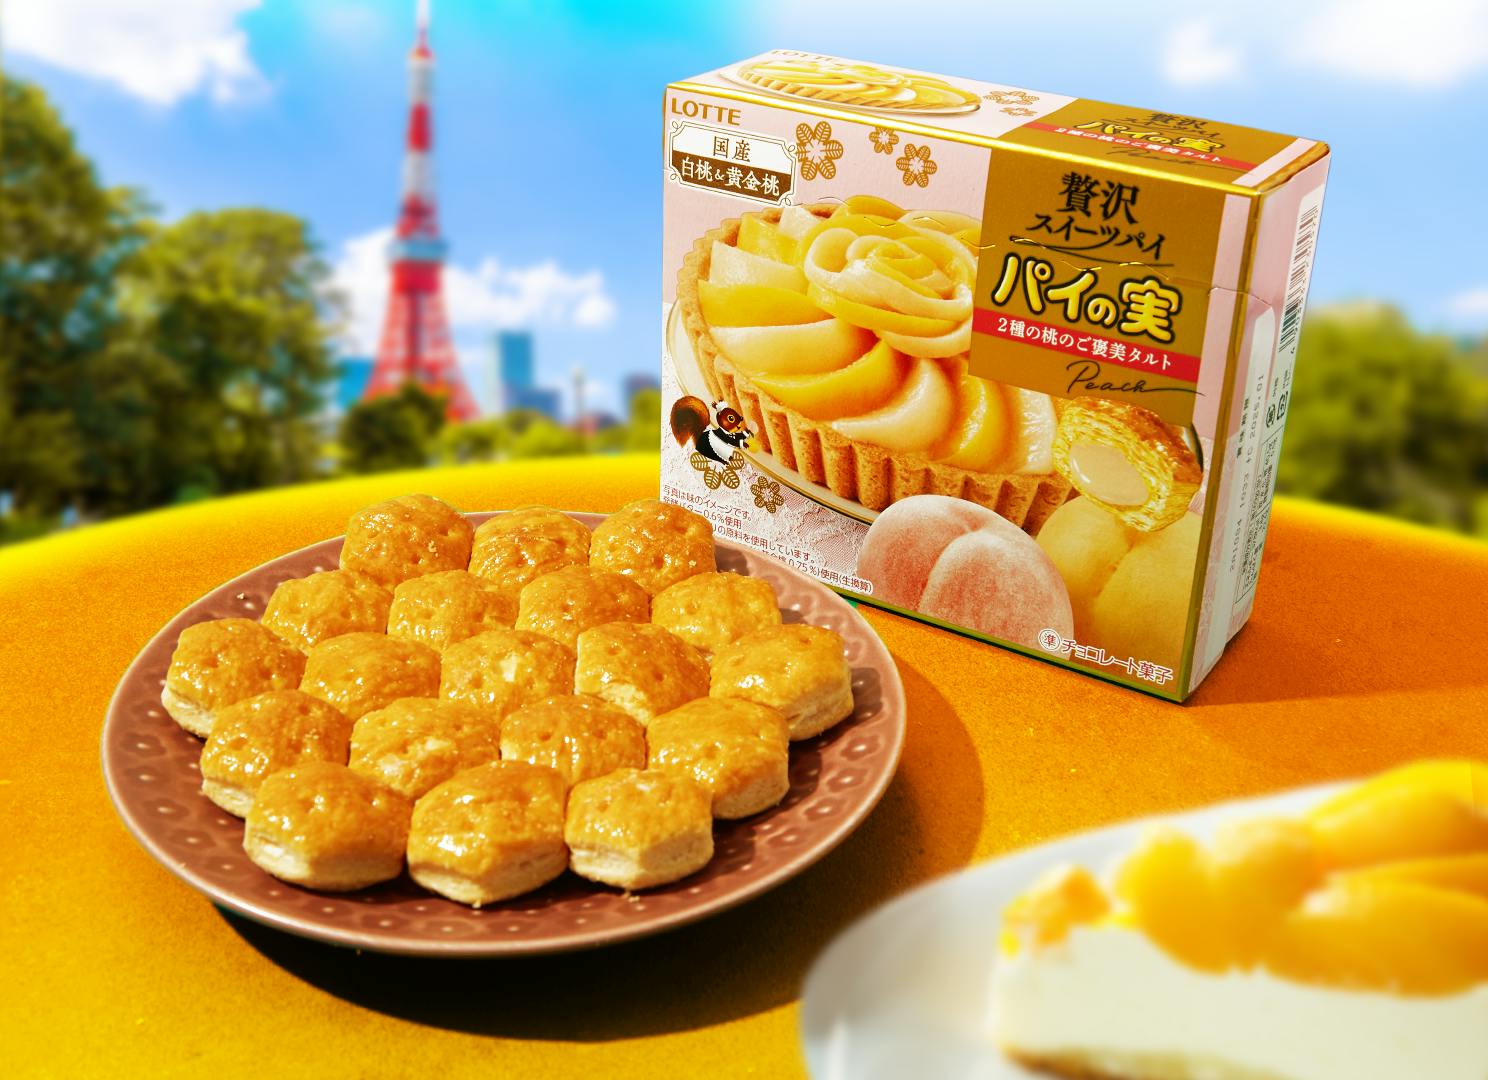 Pai no Mi Mini Pies sits on a golden yellow background, surrounded by Tokyo motifs.